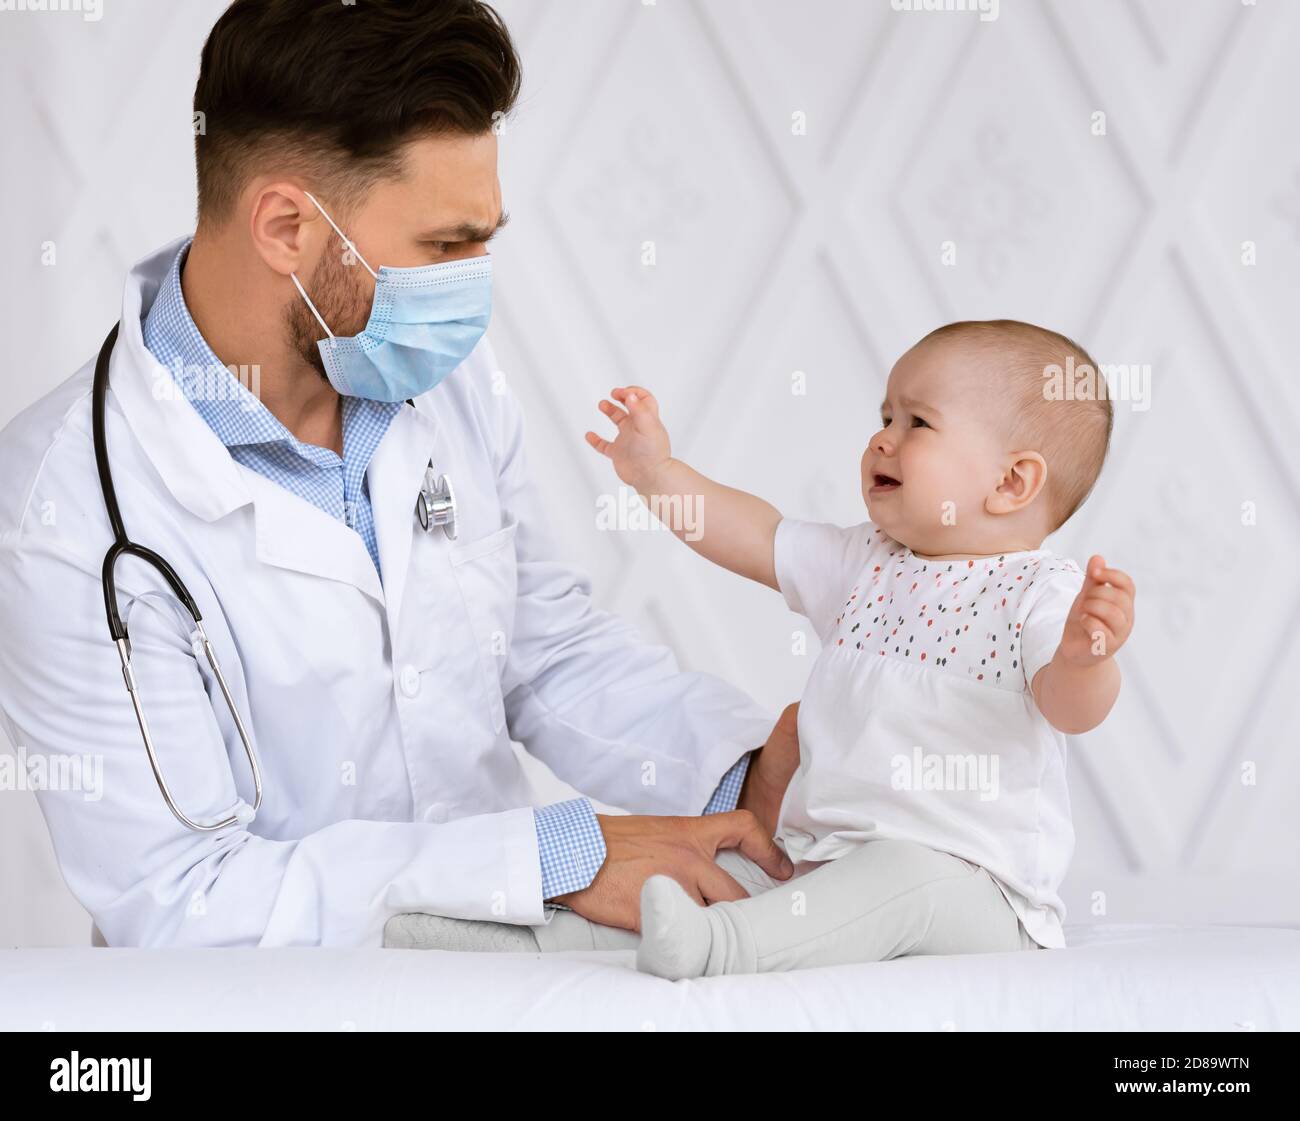 Sick Little Newborn Patient Crying During Medical Checkup In Hospital Stock Photo